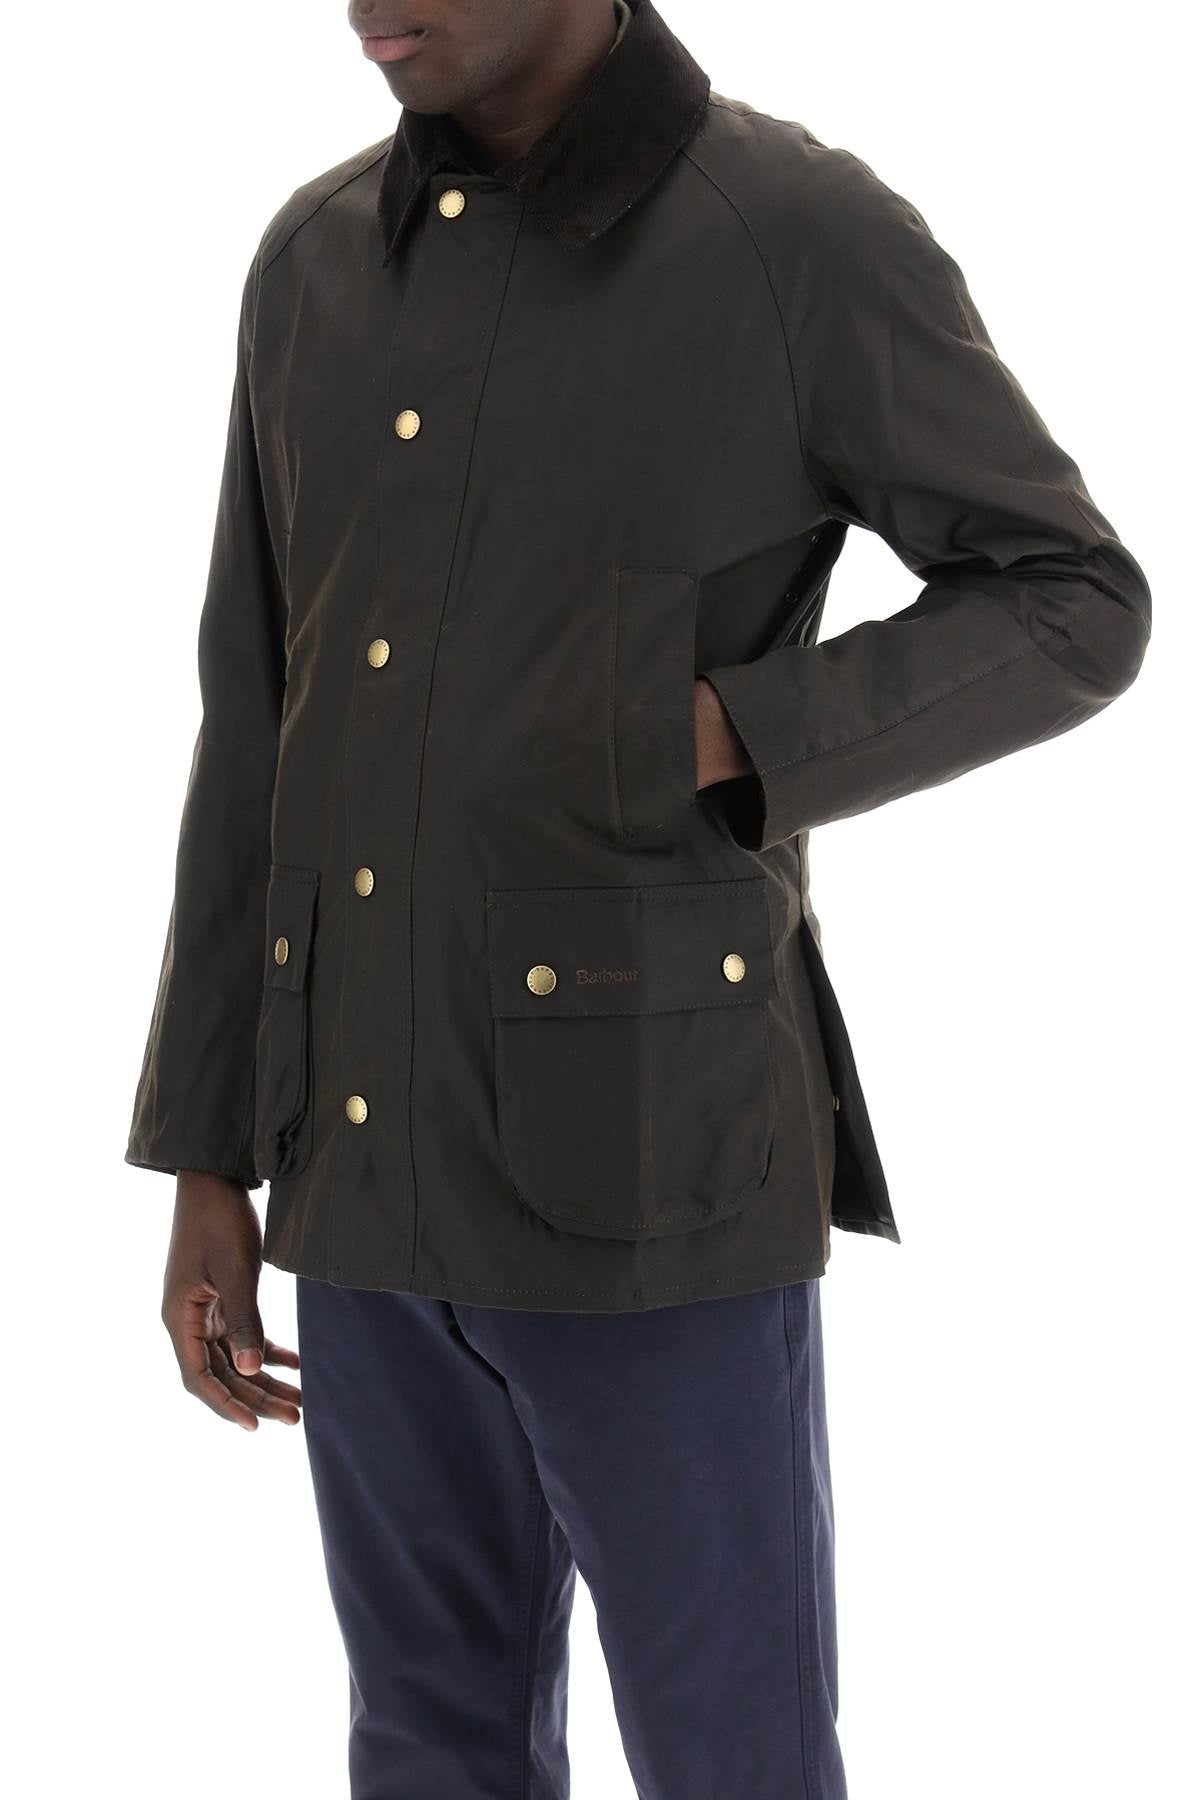 Barbour ashby waxed jacket-3